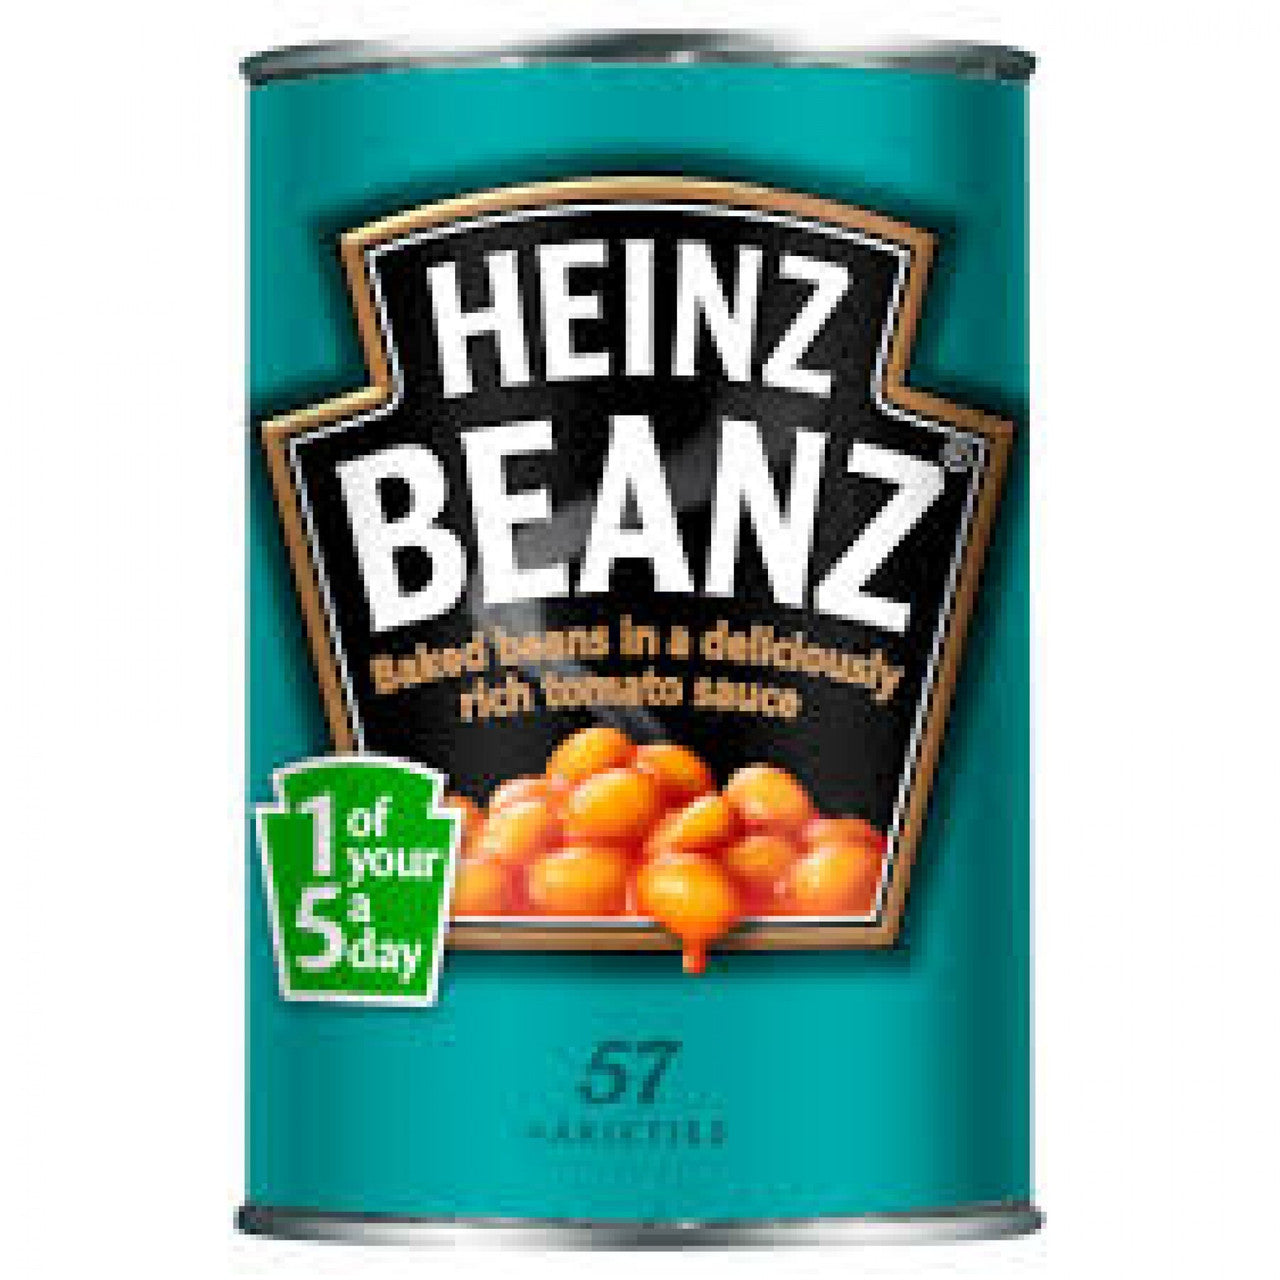 Baked Beans sold on NIyis.co.uk